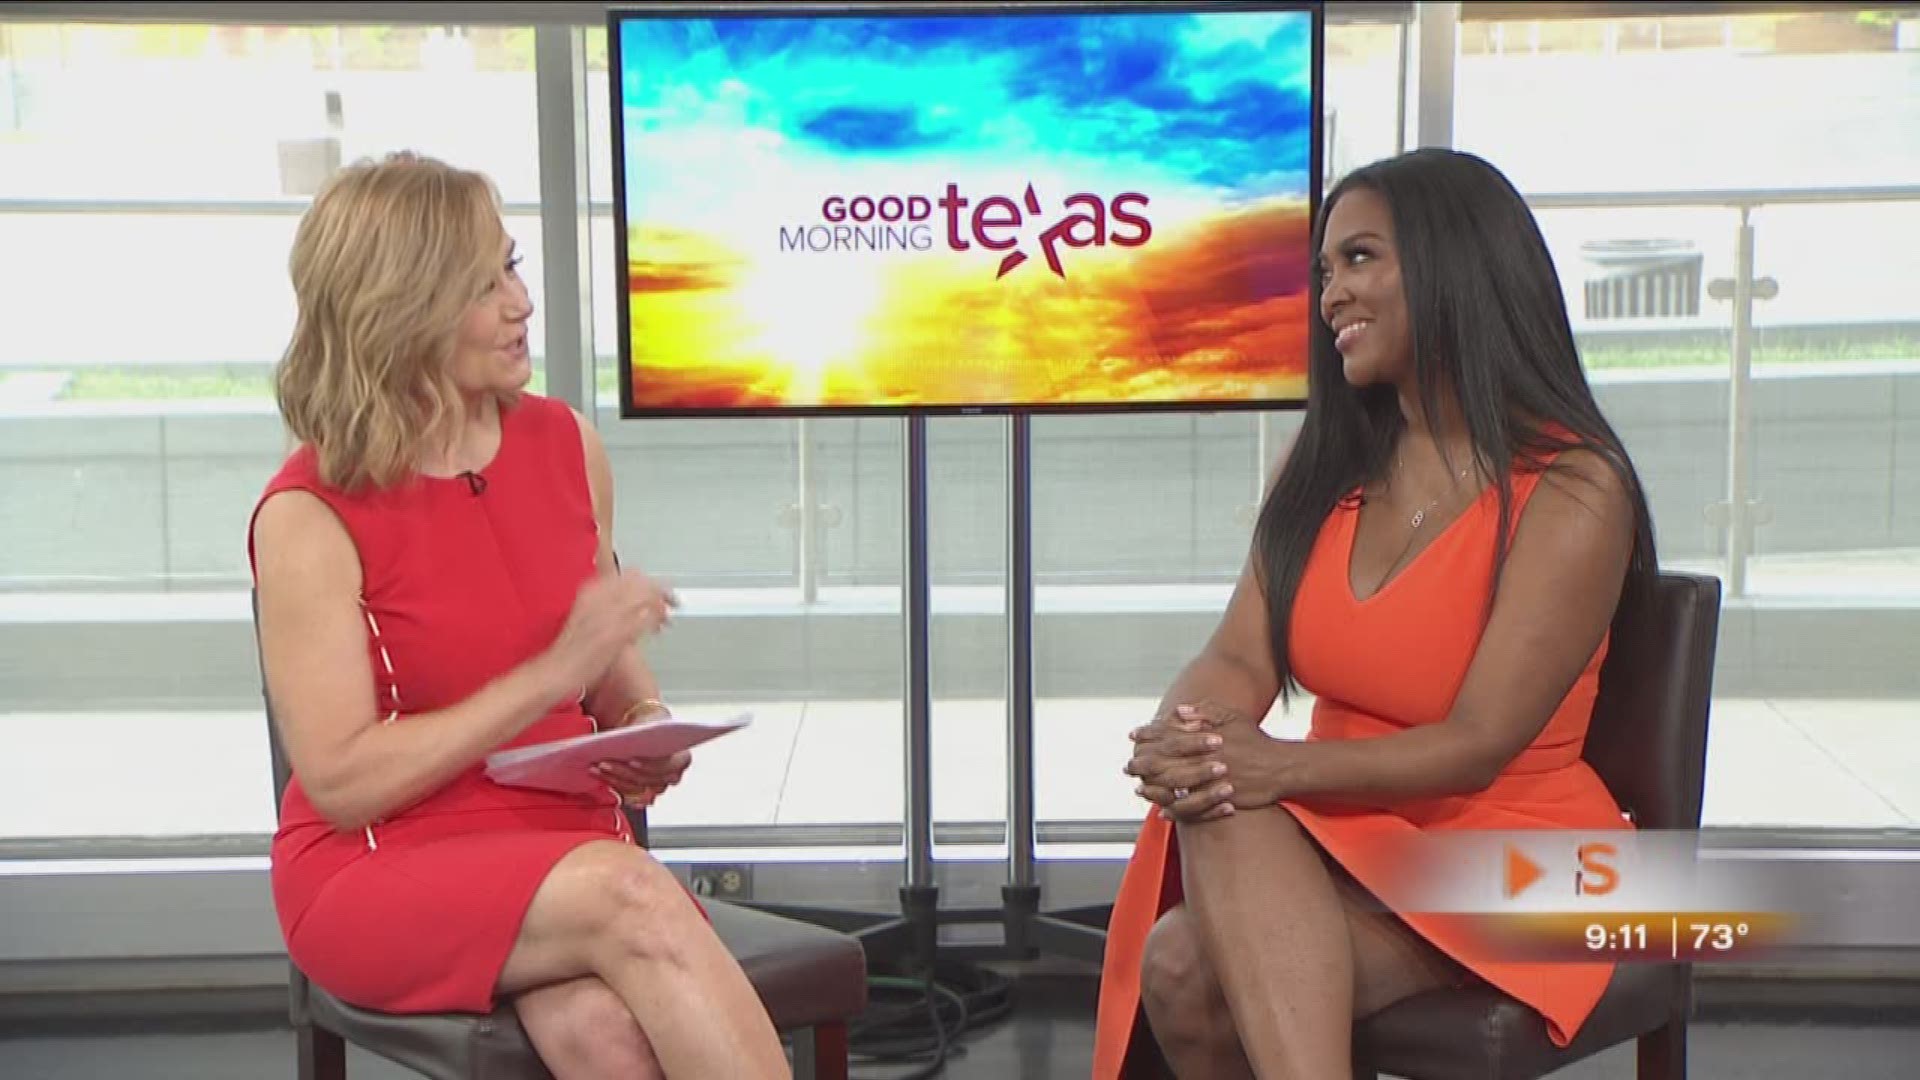 You can meet Kenya Moore Daly Saturday, May 18 at Sally Beauty in Frisco at 11550 Legacy Drive from 1-3 p.m. She's also a keynote speaker on Sunday, May 19 at the Dallas Fort Worth Ultimate Women's Expo at the Irving Convention Center.  For more information on Kenya and her hair care line go to www.KenyaMooreHairCare.com or www.KenyaMoore.com.